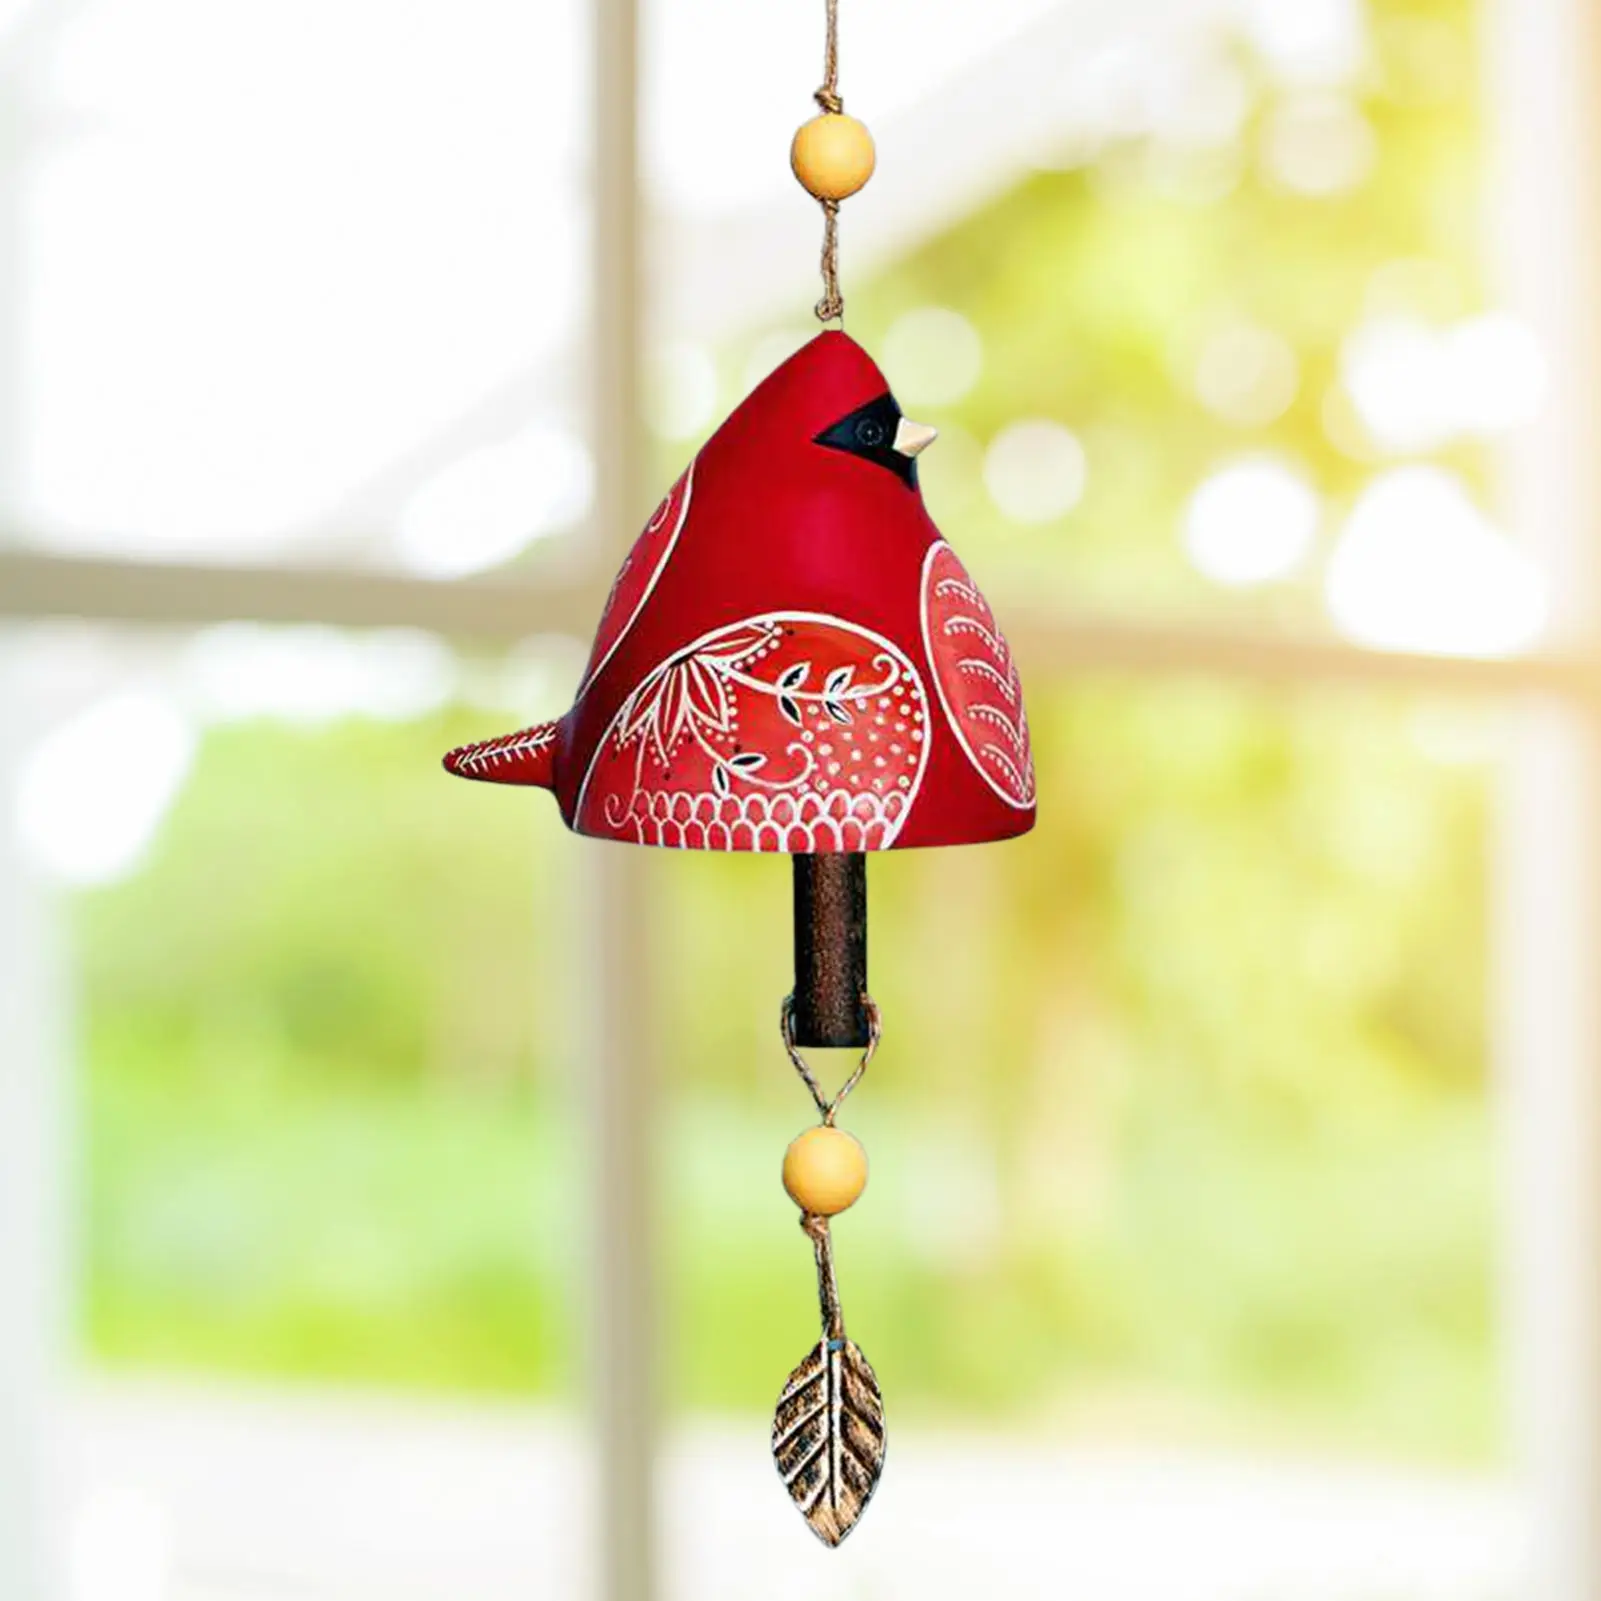 

Wind Chime Hand Painted Delicate Gift Windchime Colorful Vivid Lucky Bird Bell Wind Chimes Indoor Outdoor Garden Home Windchimes